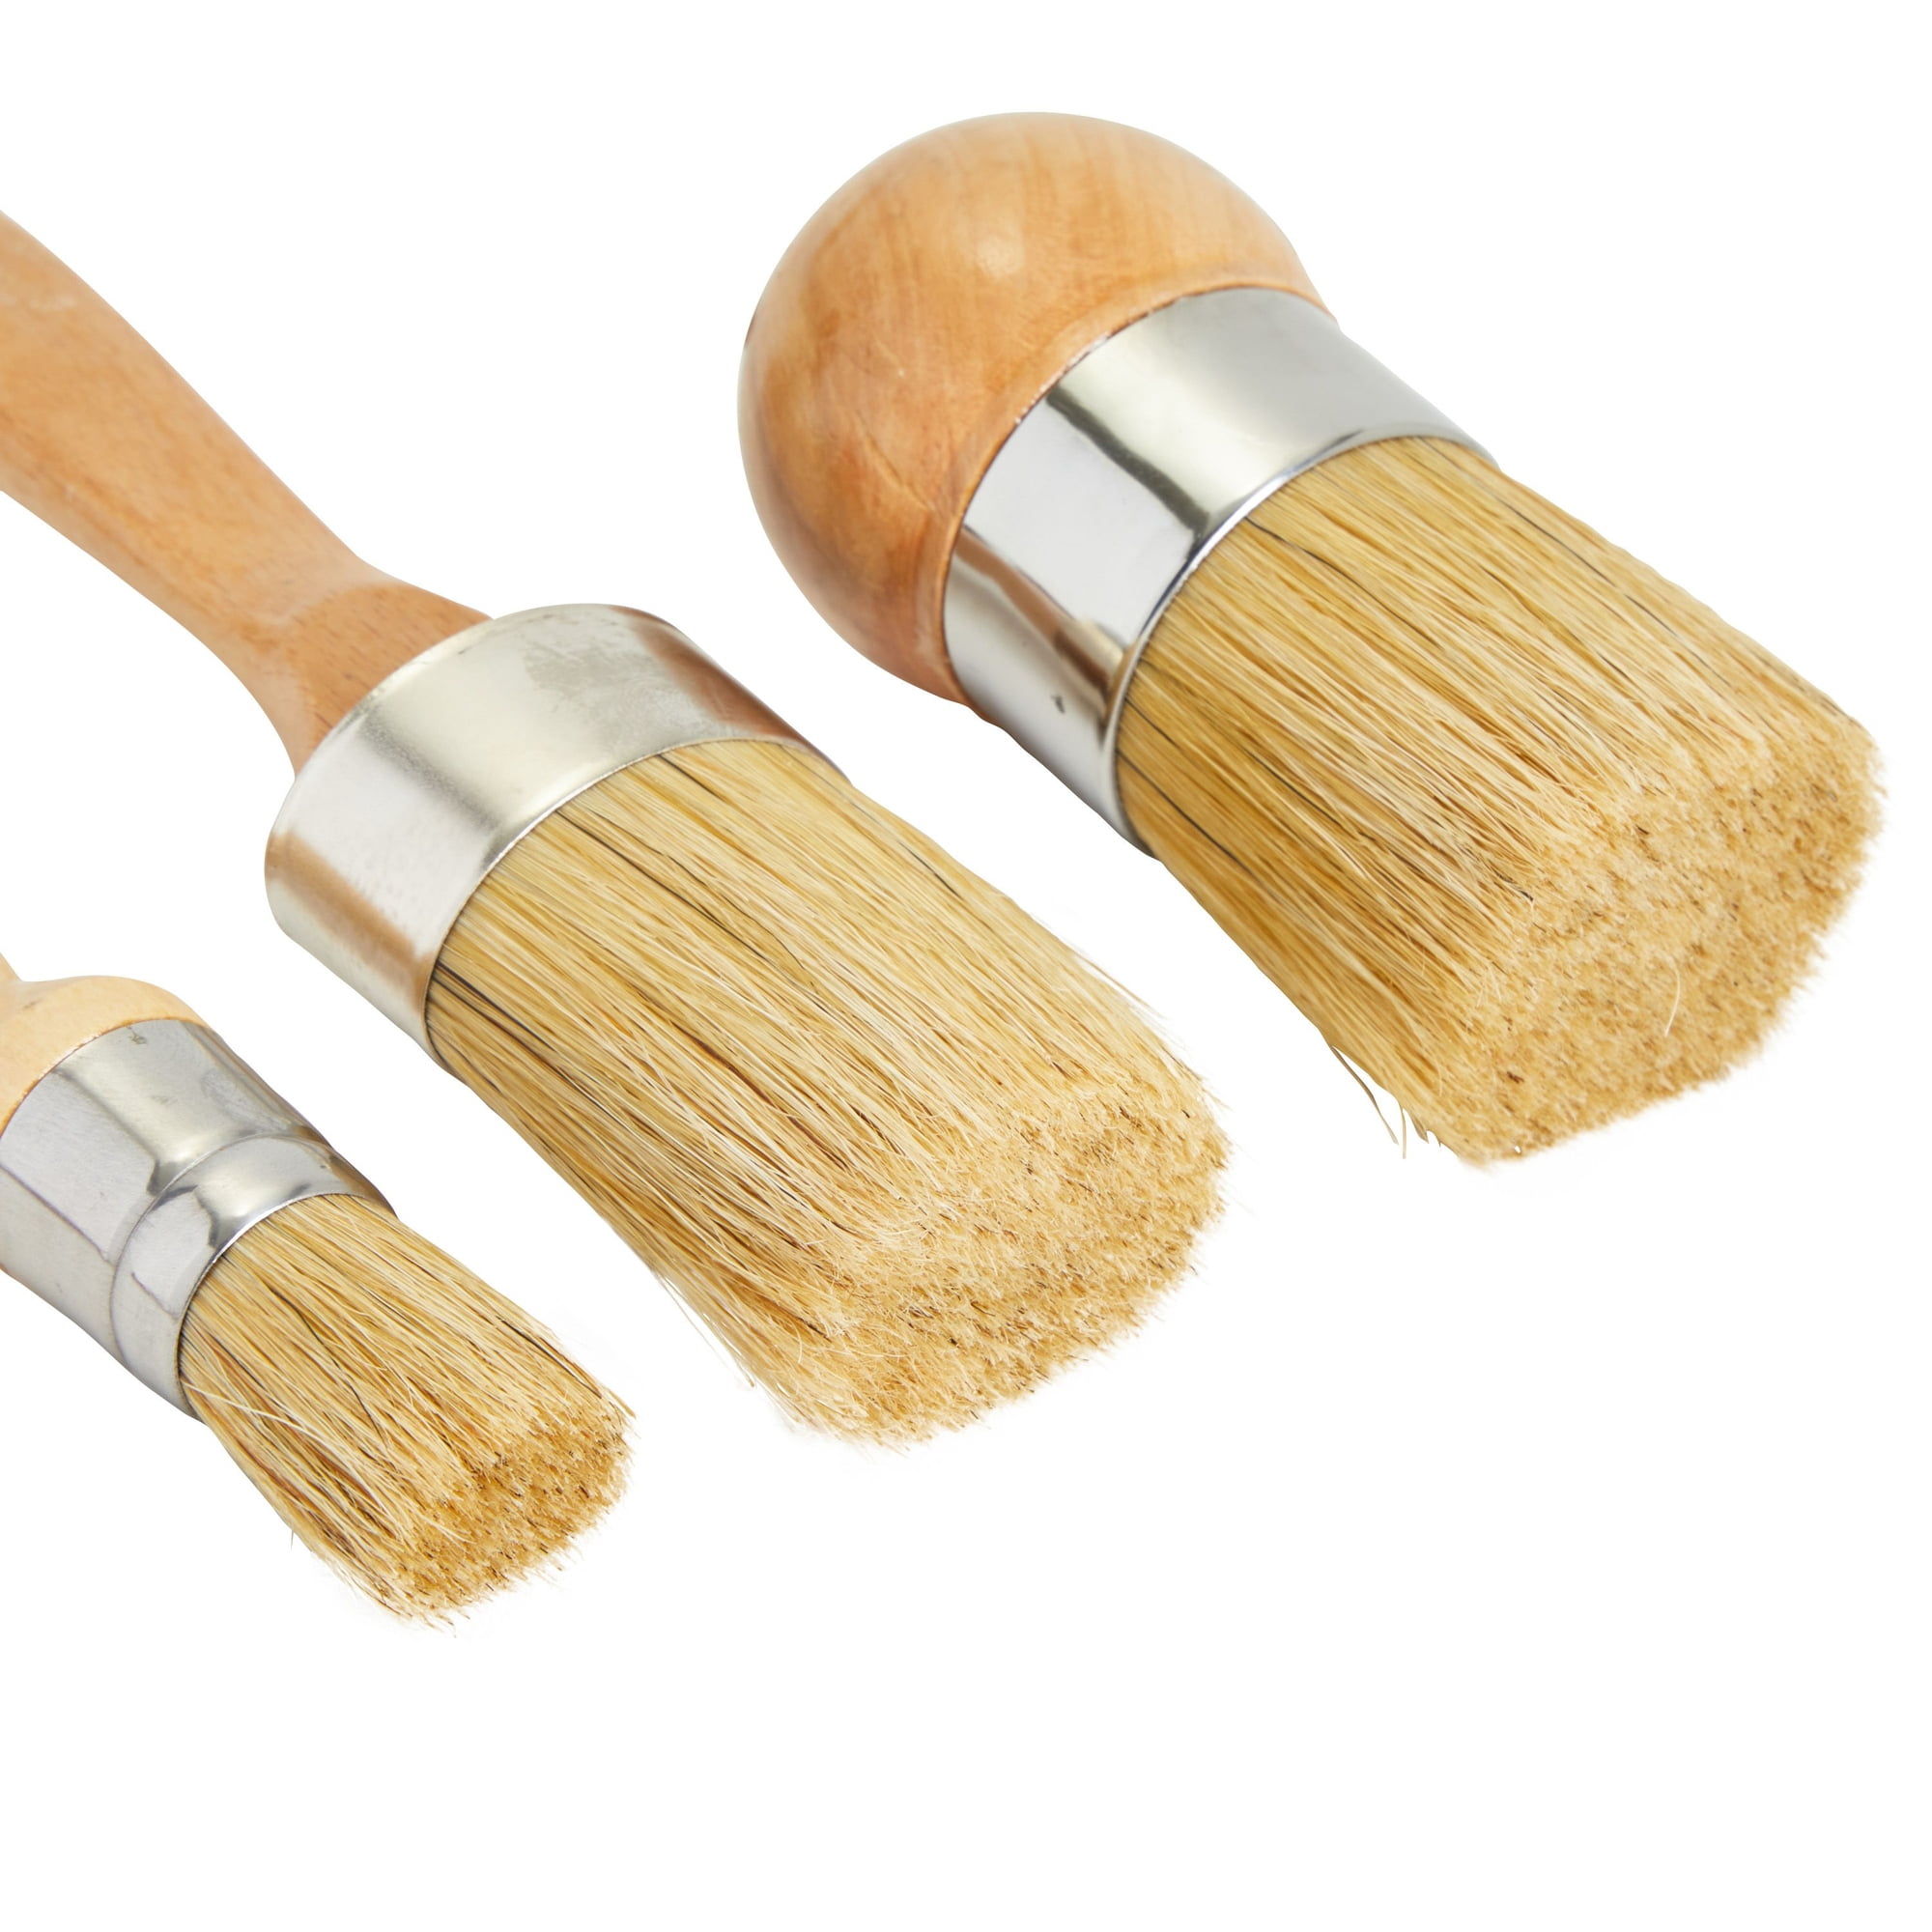 6 Pieces Chalk Paint Brush Set, Chalk Paint Brushes for Furniture, Wax  Brush Boar Bristle for Home Decor